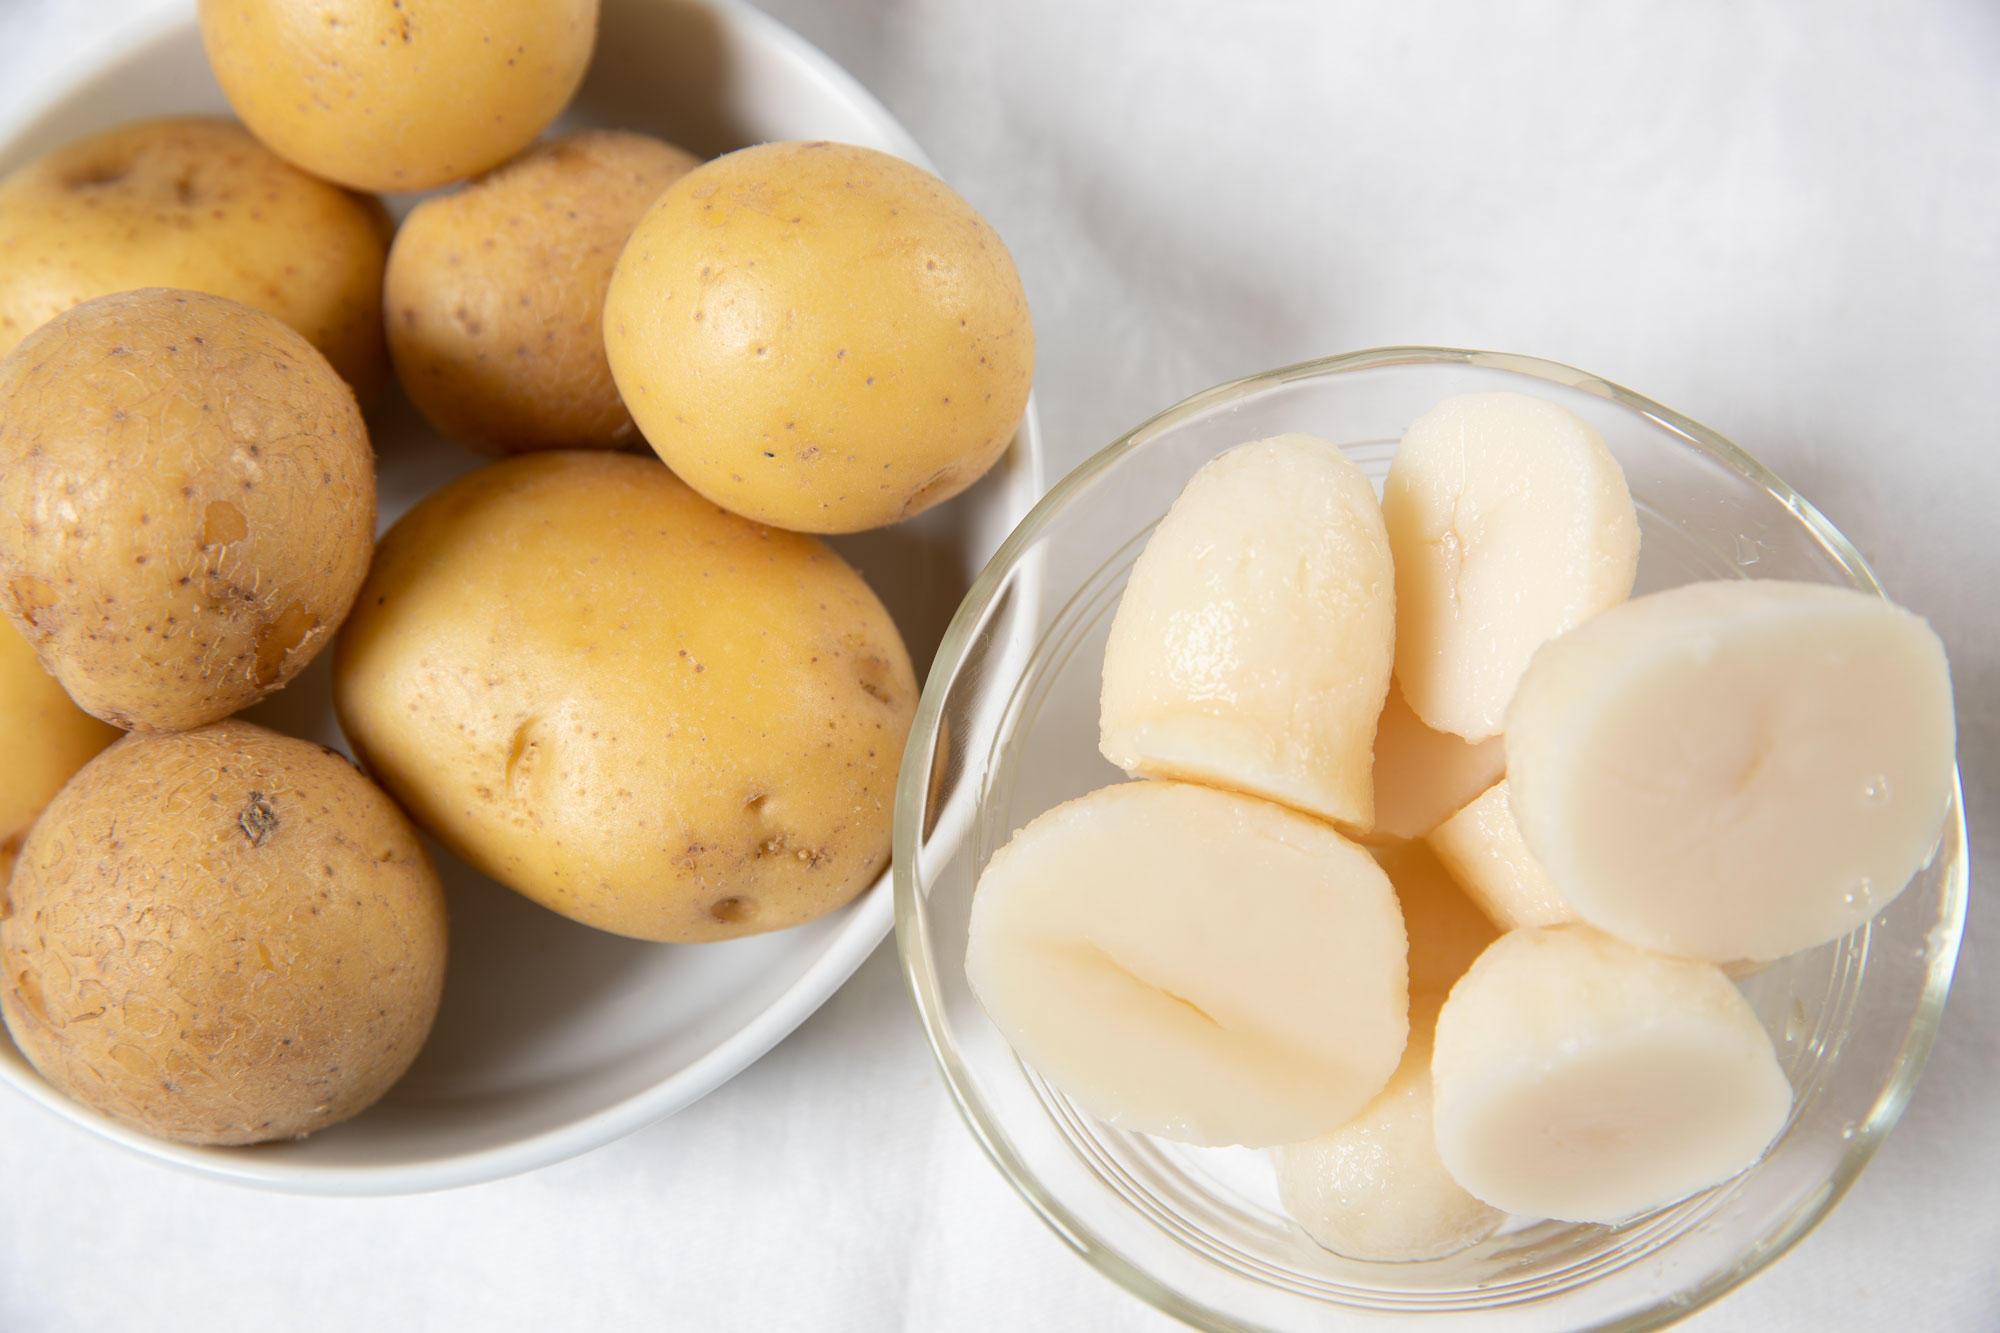 This Tiny Tuber Is Packed With Health Benefits. Here Are 9 of Them